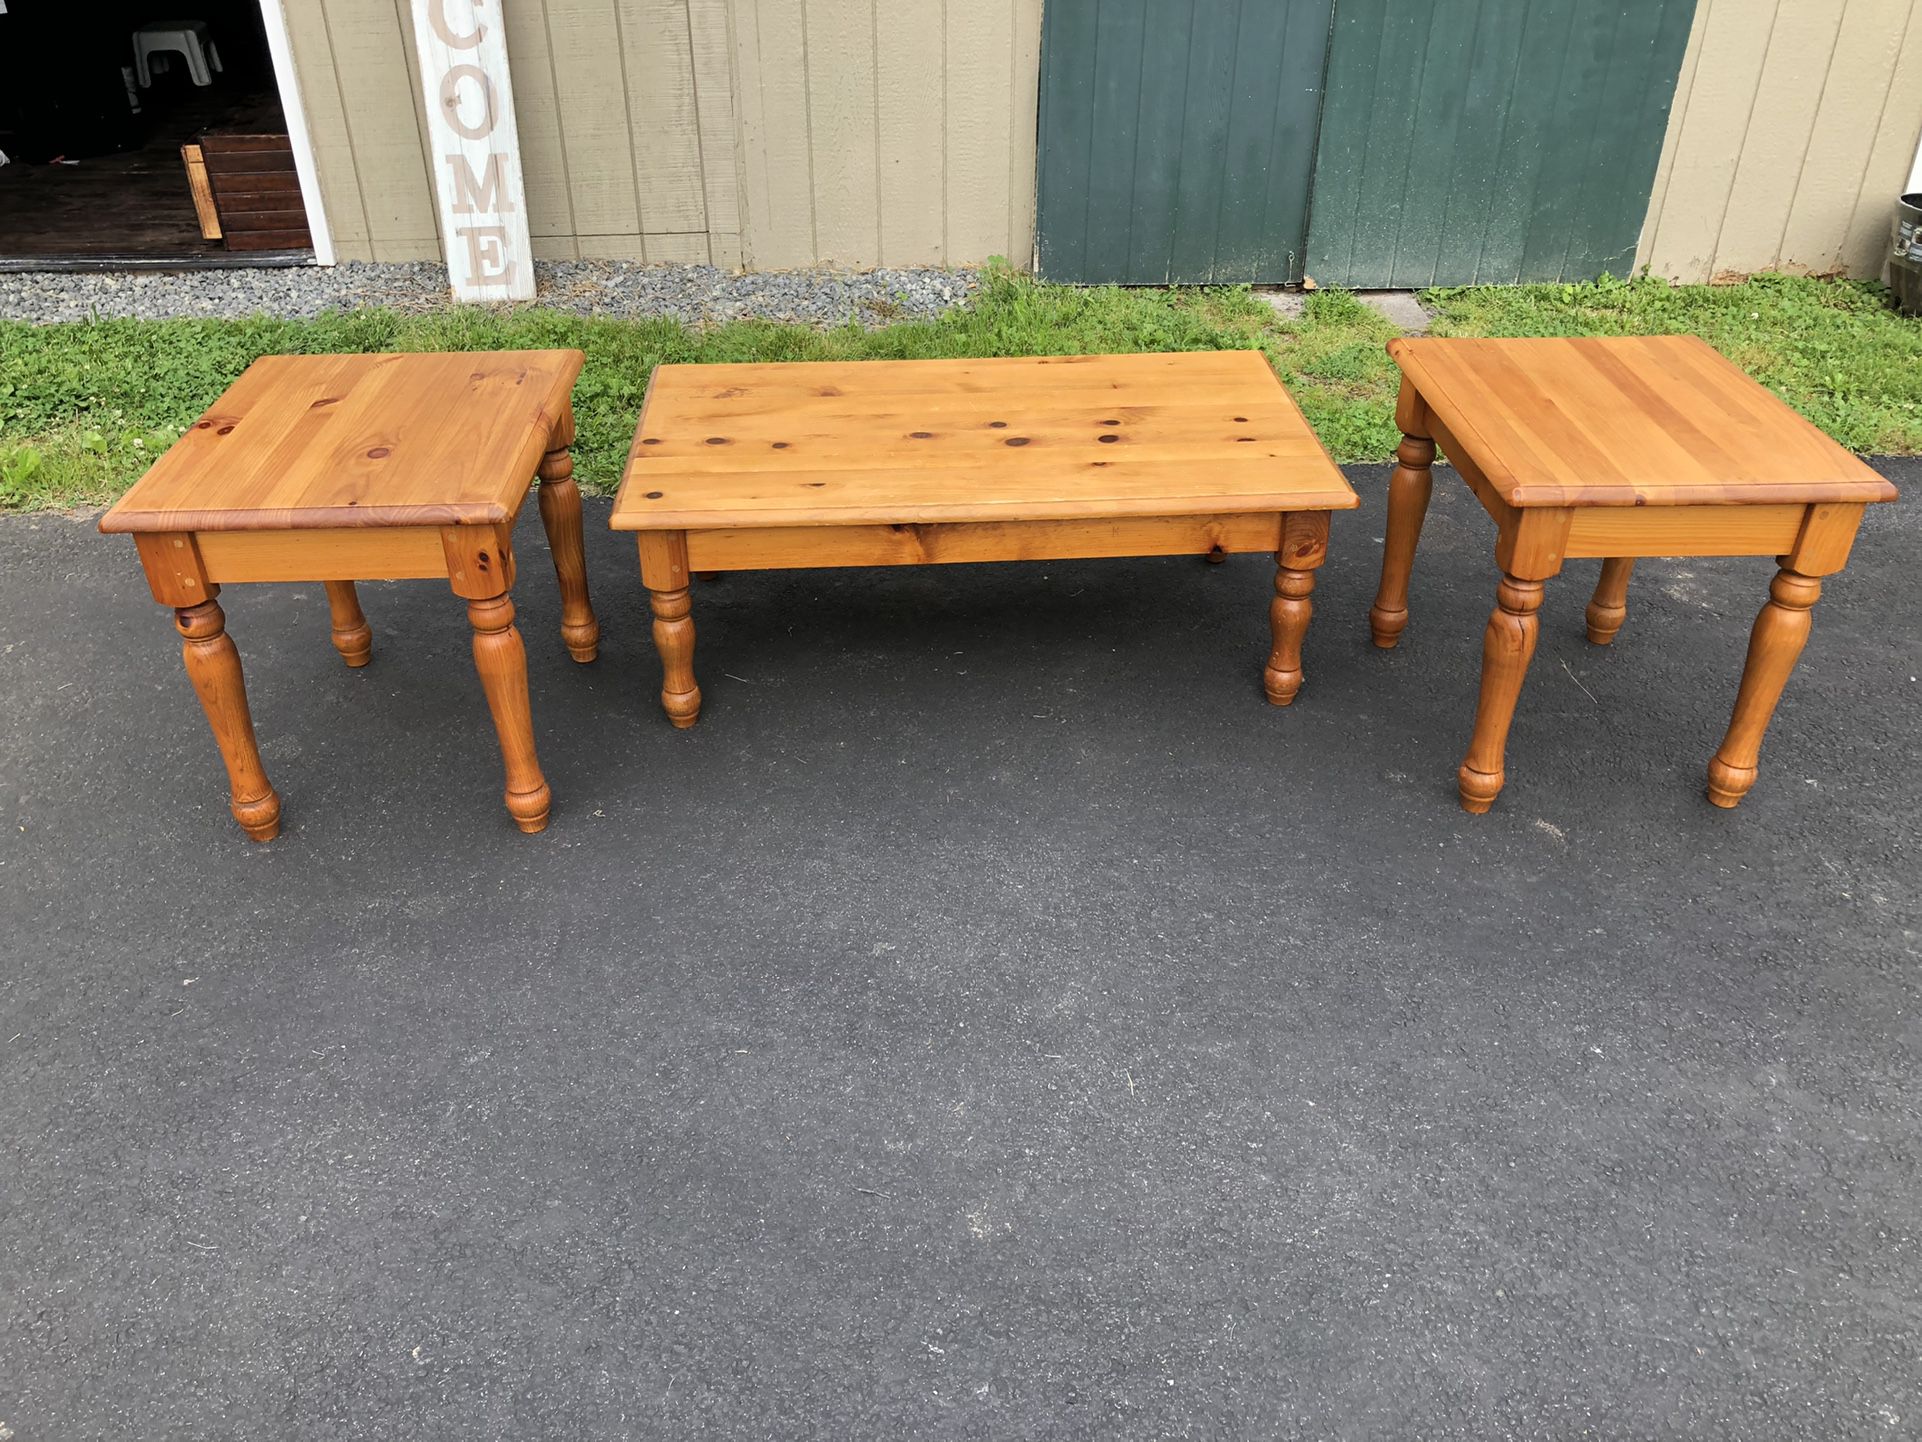 3 Piece pine Wood End Table Tables And Coffe table